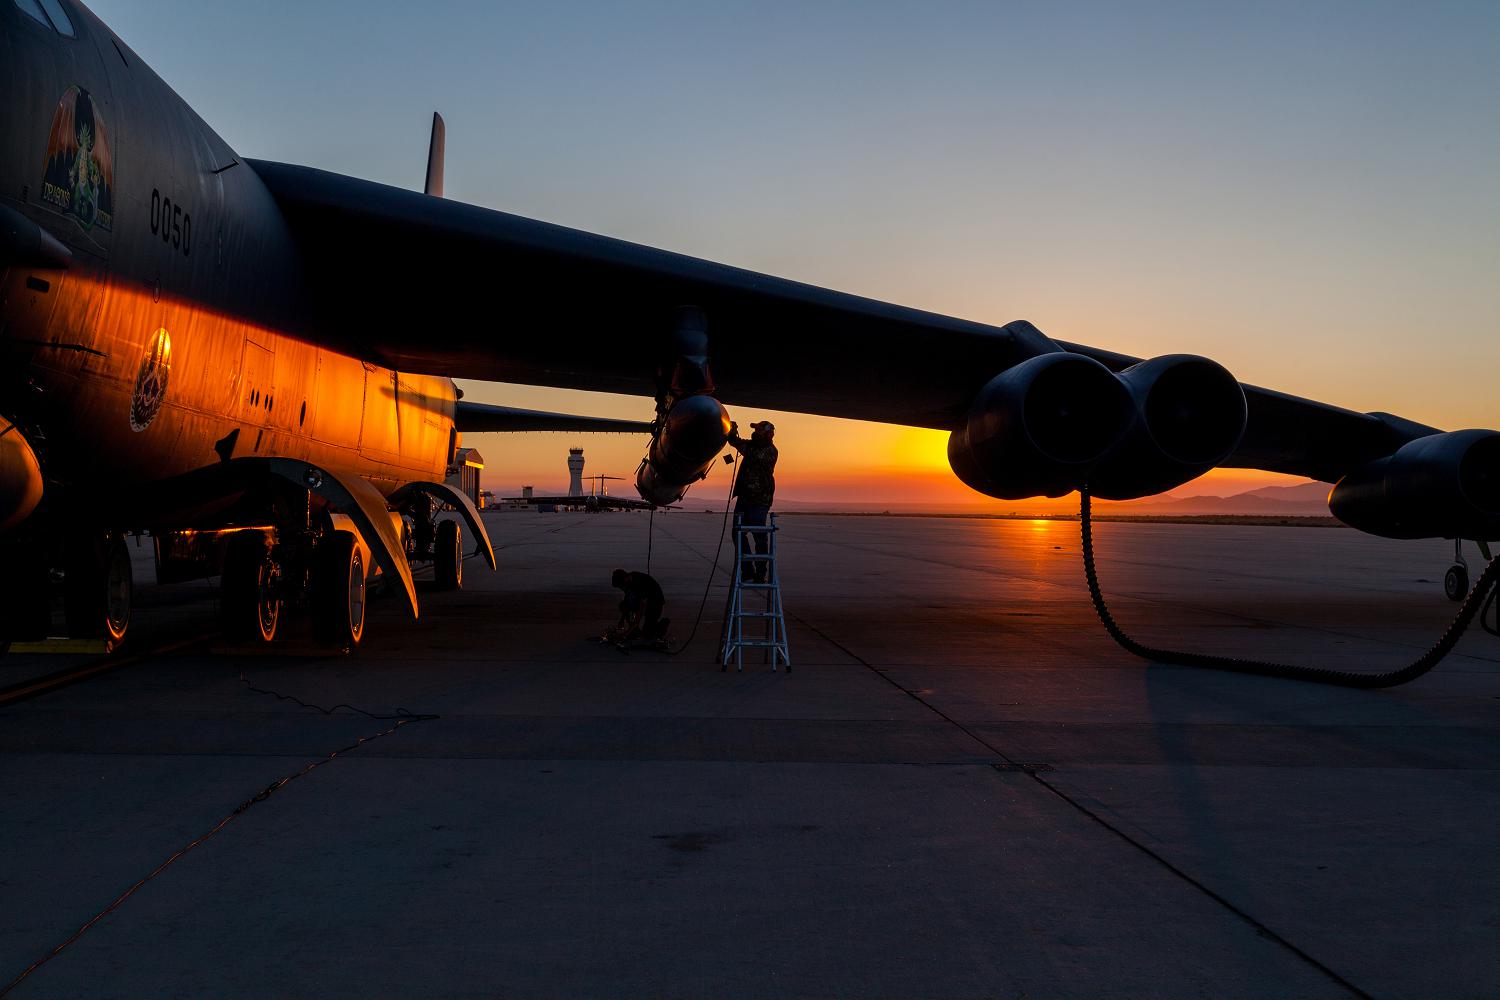 Members of the AGM-183A Air-launched Rapid Response Weapon Instrumented Measurement Vehicle 2 test team make final preparations prior to a captive-carry test flight of the prototype hypersonic weapon at Edwards Air Force Base, California, Aug. 8. (photo by Kyle Brasier)